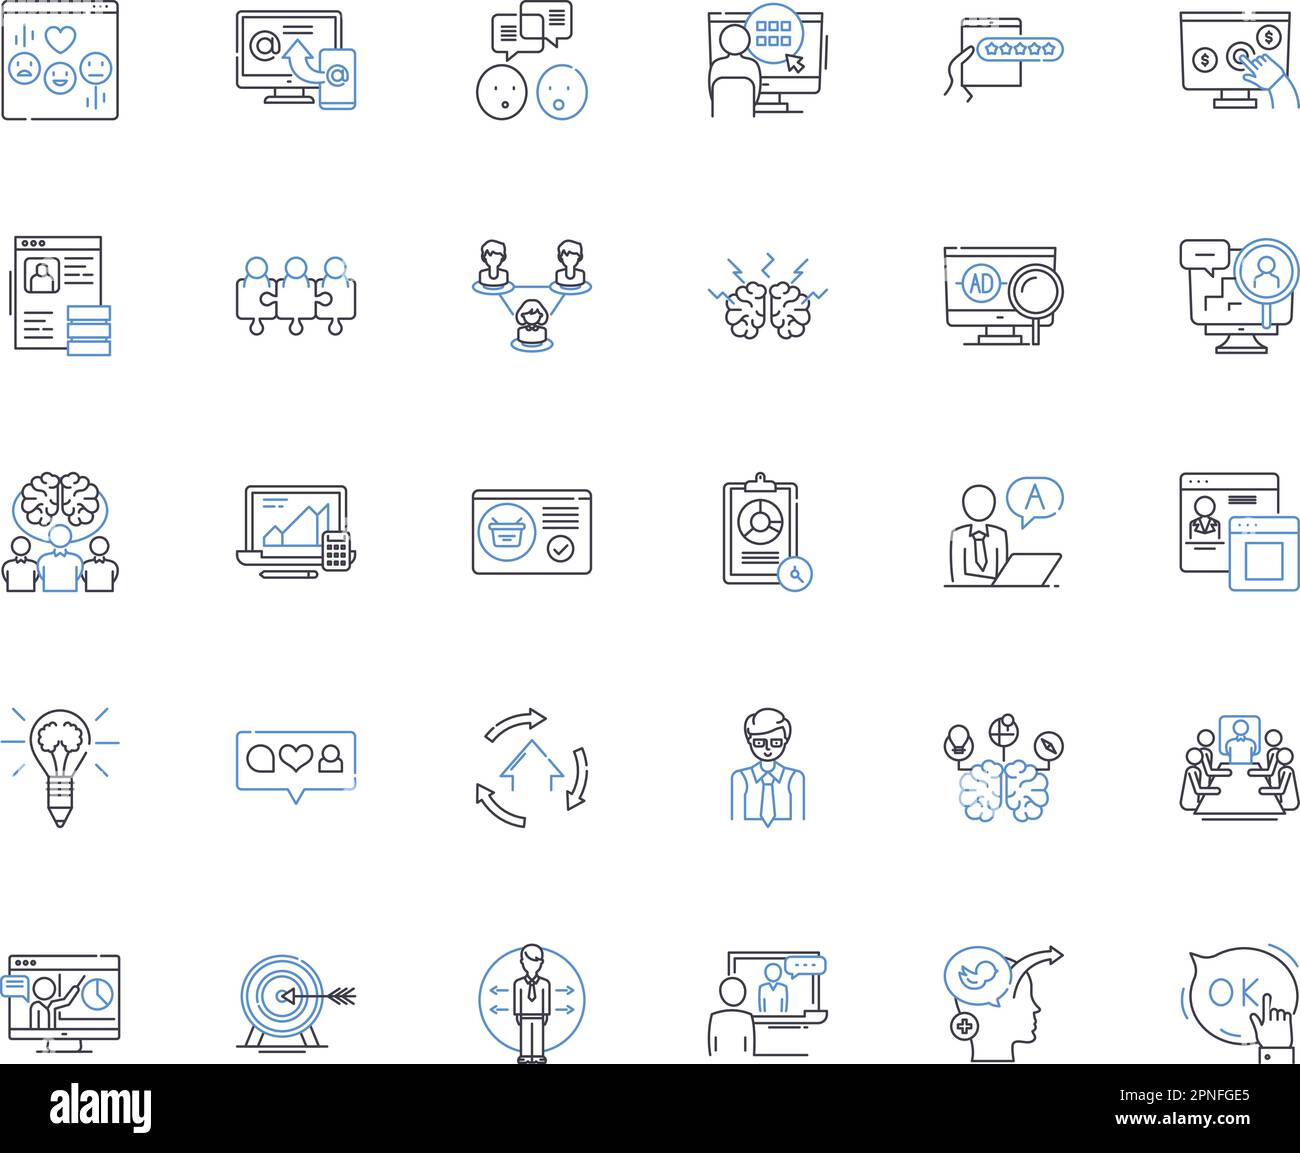 Marketing strategies line icons collection. Branding, Segmentation, Differentiation, Advertising, Positioning, Persuasion, Promotion vector and linear Stock Vector